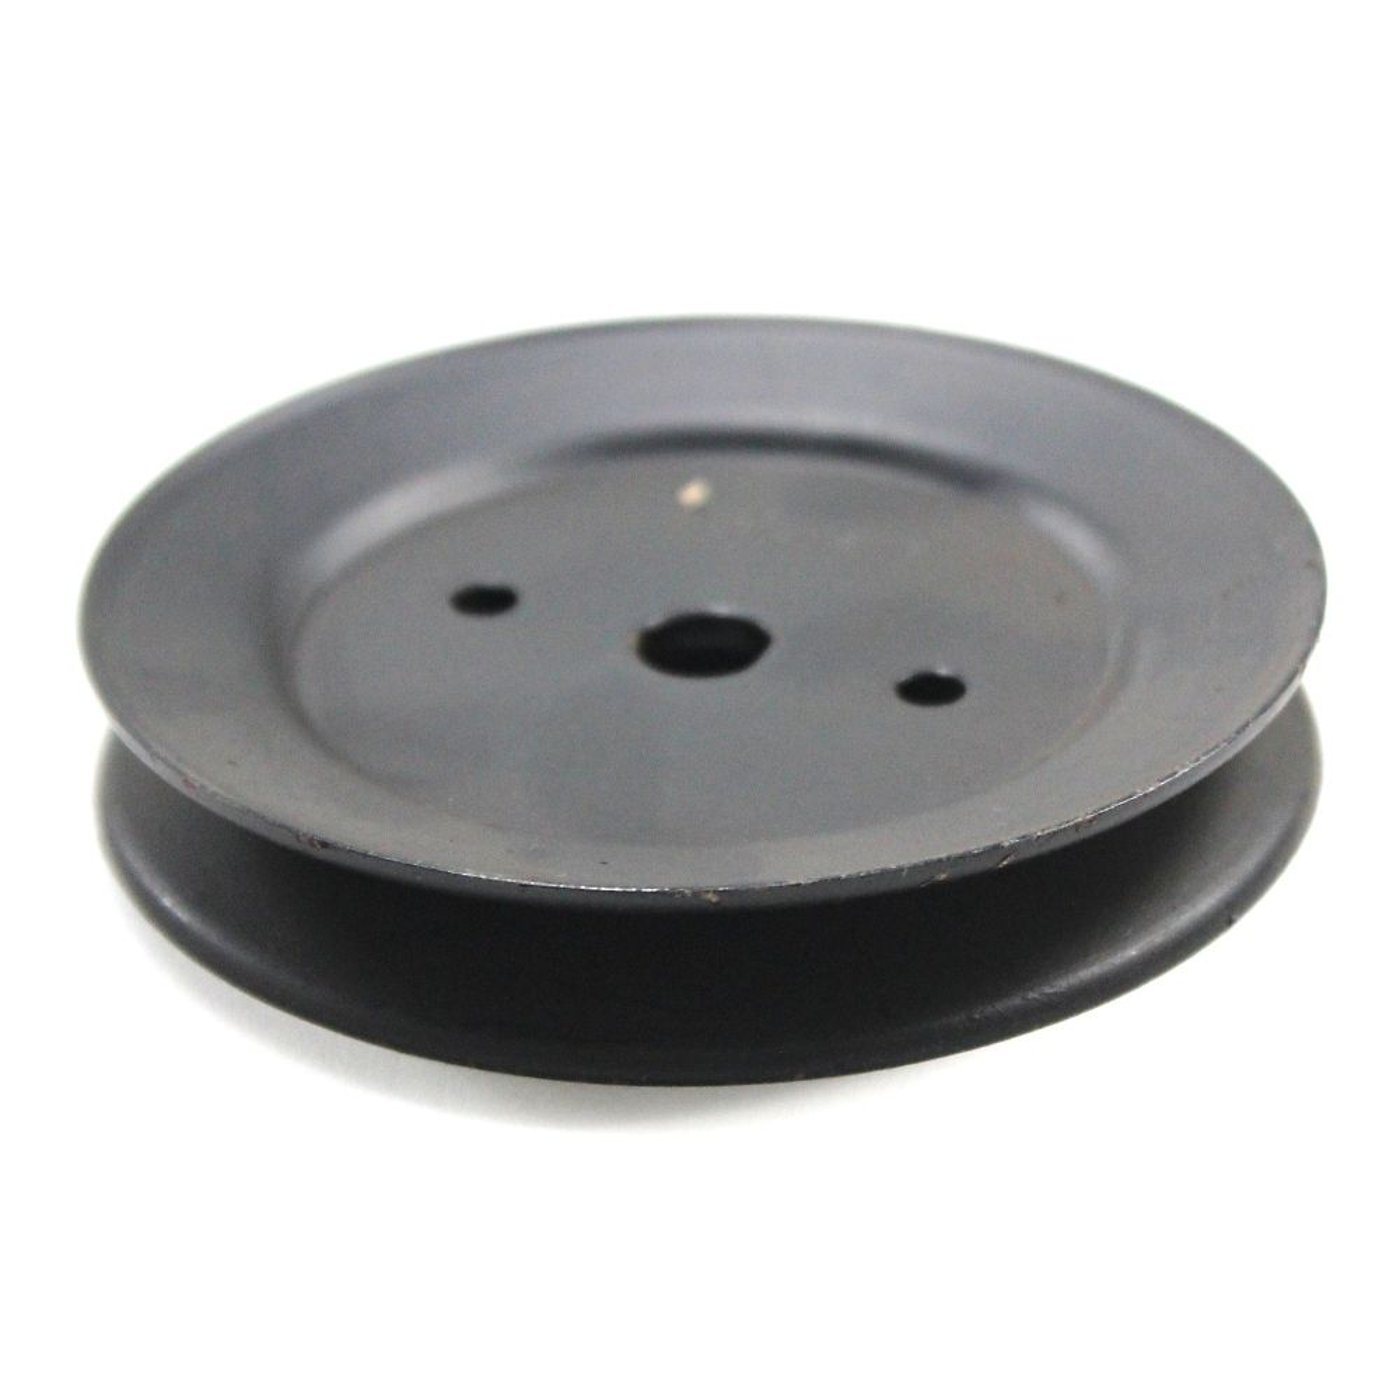 Pulley 756-04151A parts | Sears PartsDirect